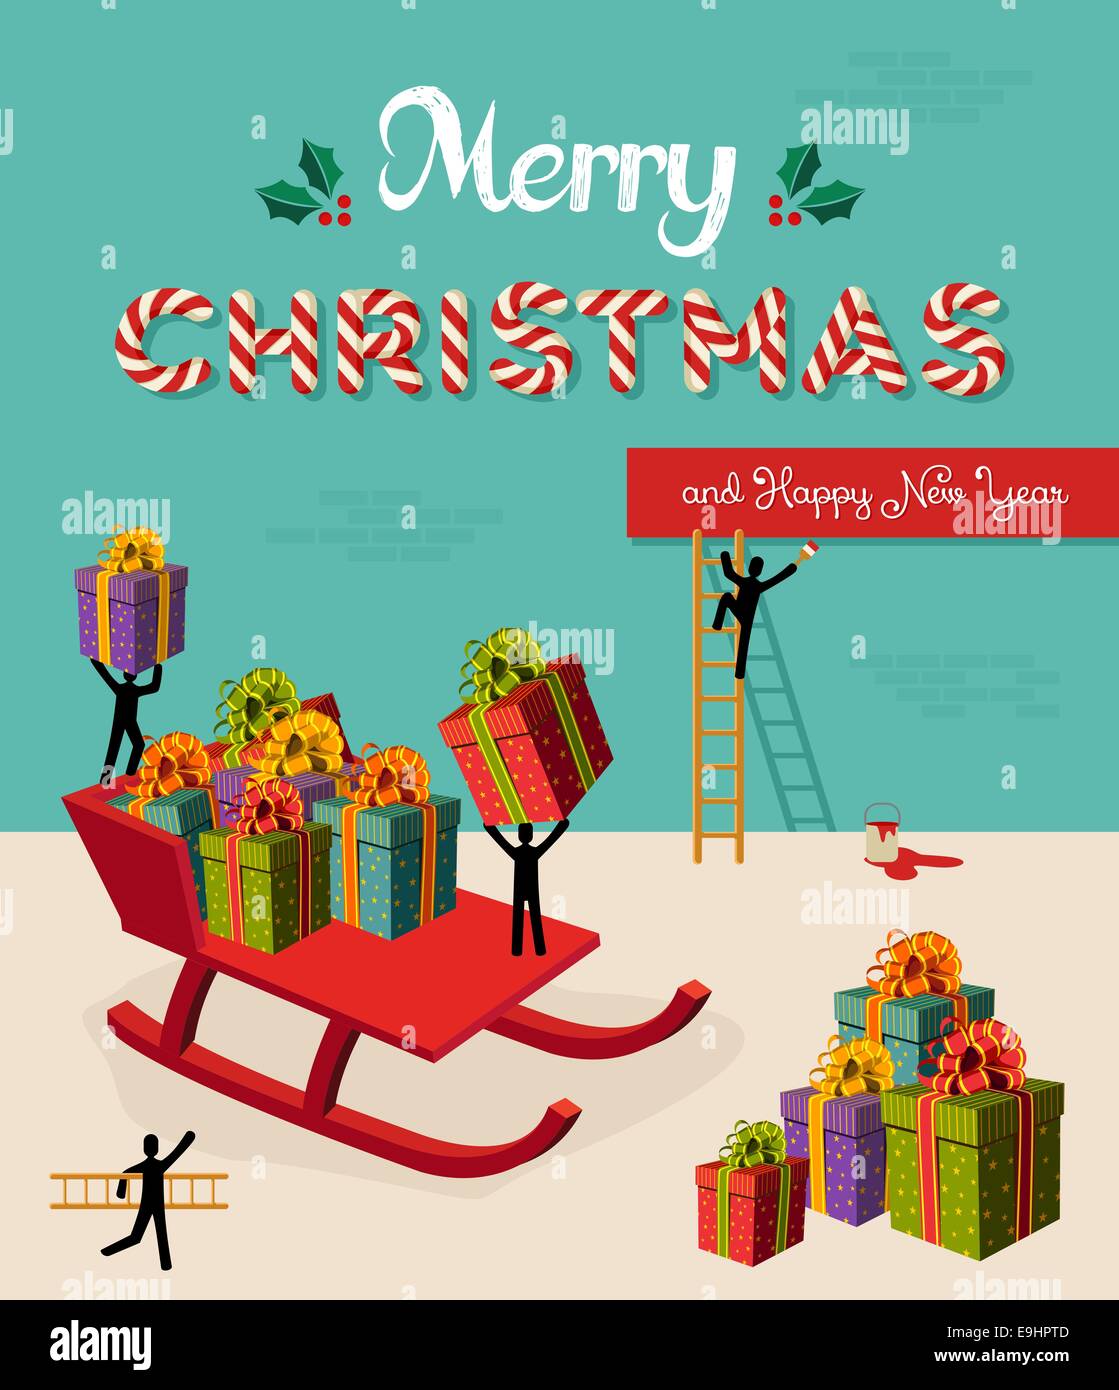 Santa teamwork prepare Merry Christmas and Happy New Year gifts. Xmas creative concept design illustration organized in layers f Stock Photo